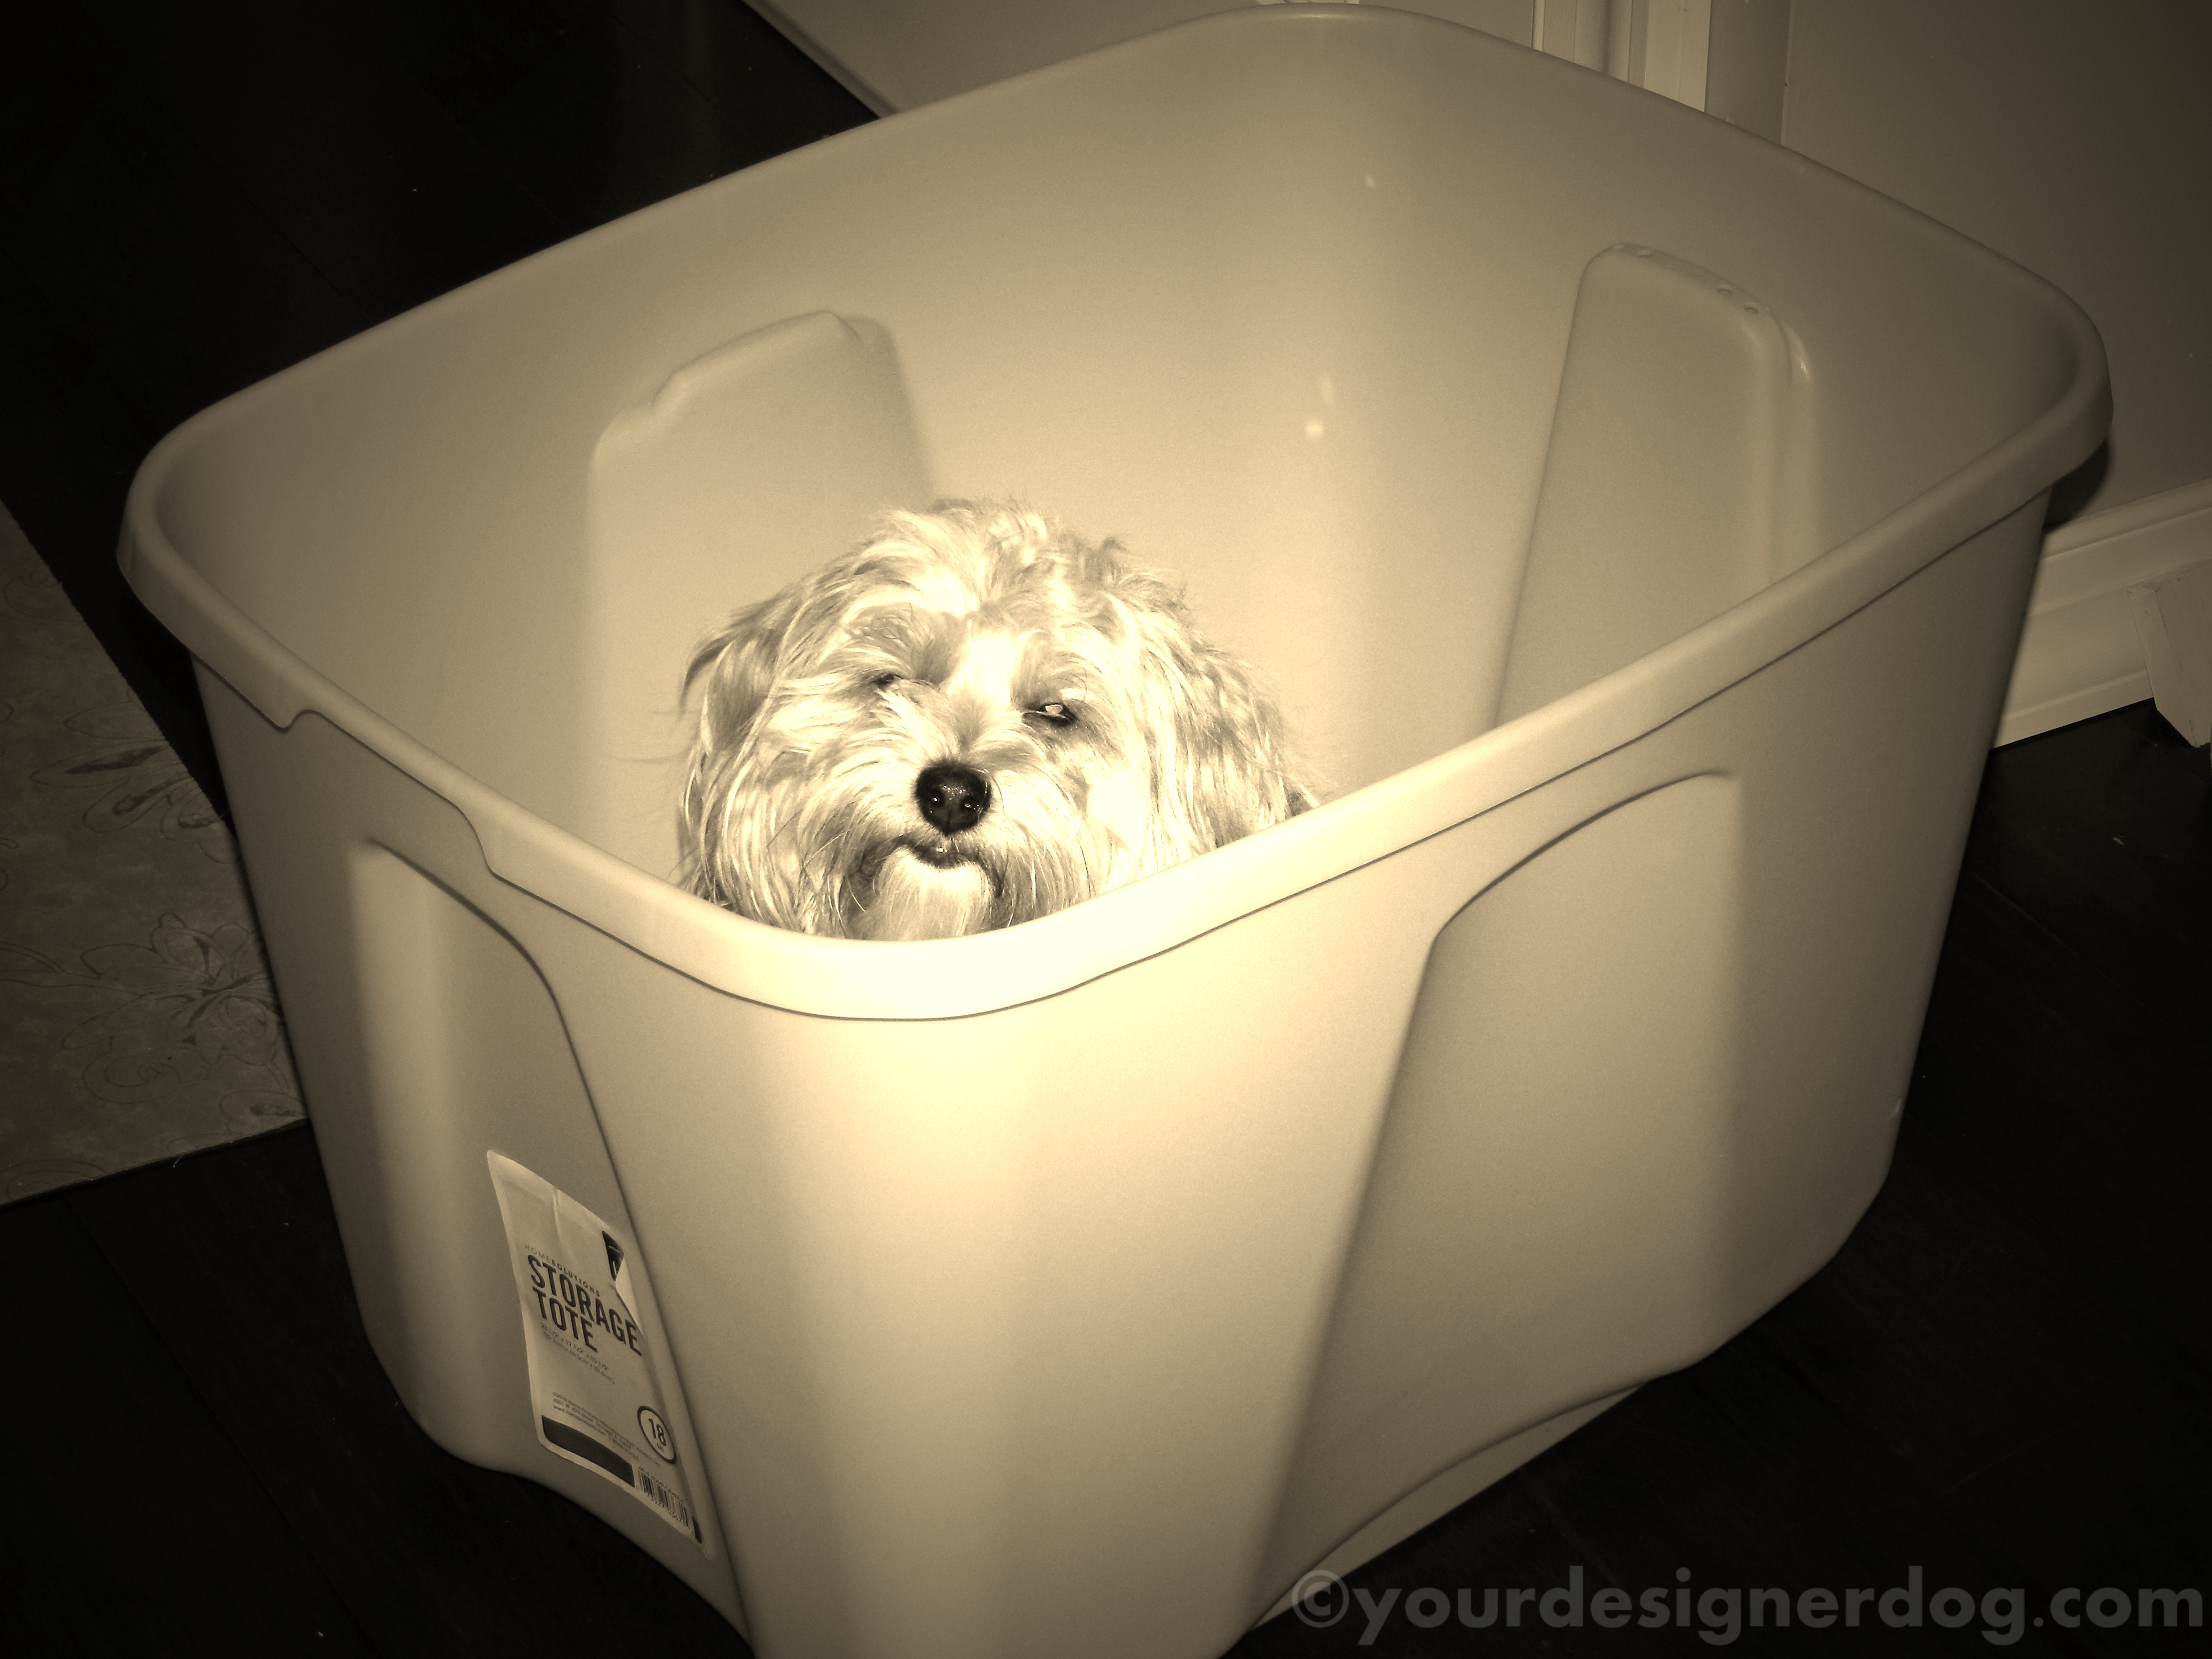 dogs, designer dogs, yorkipoo, yorkie poo, sepia photography, storage container